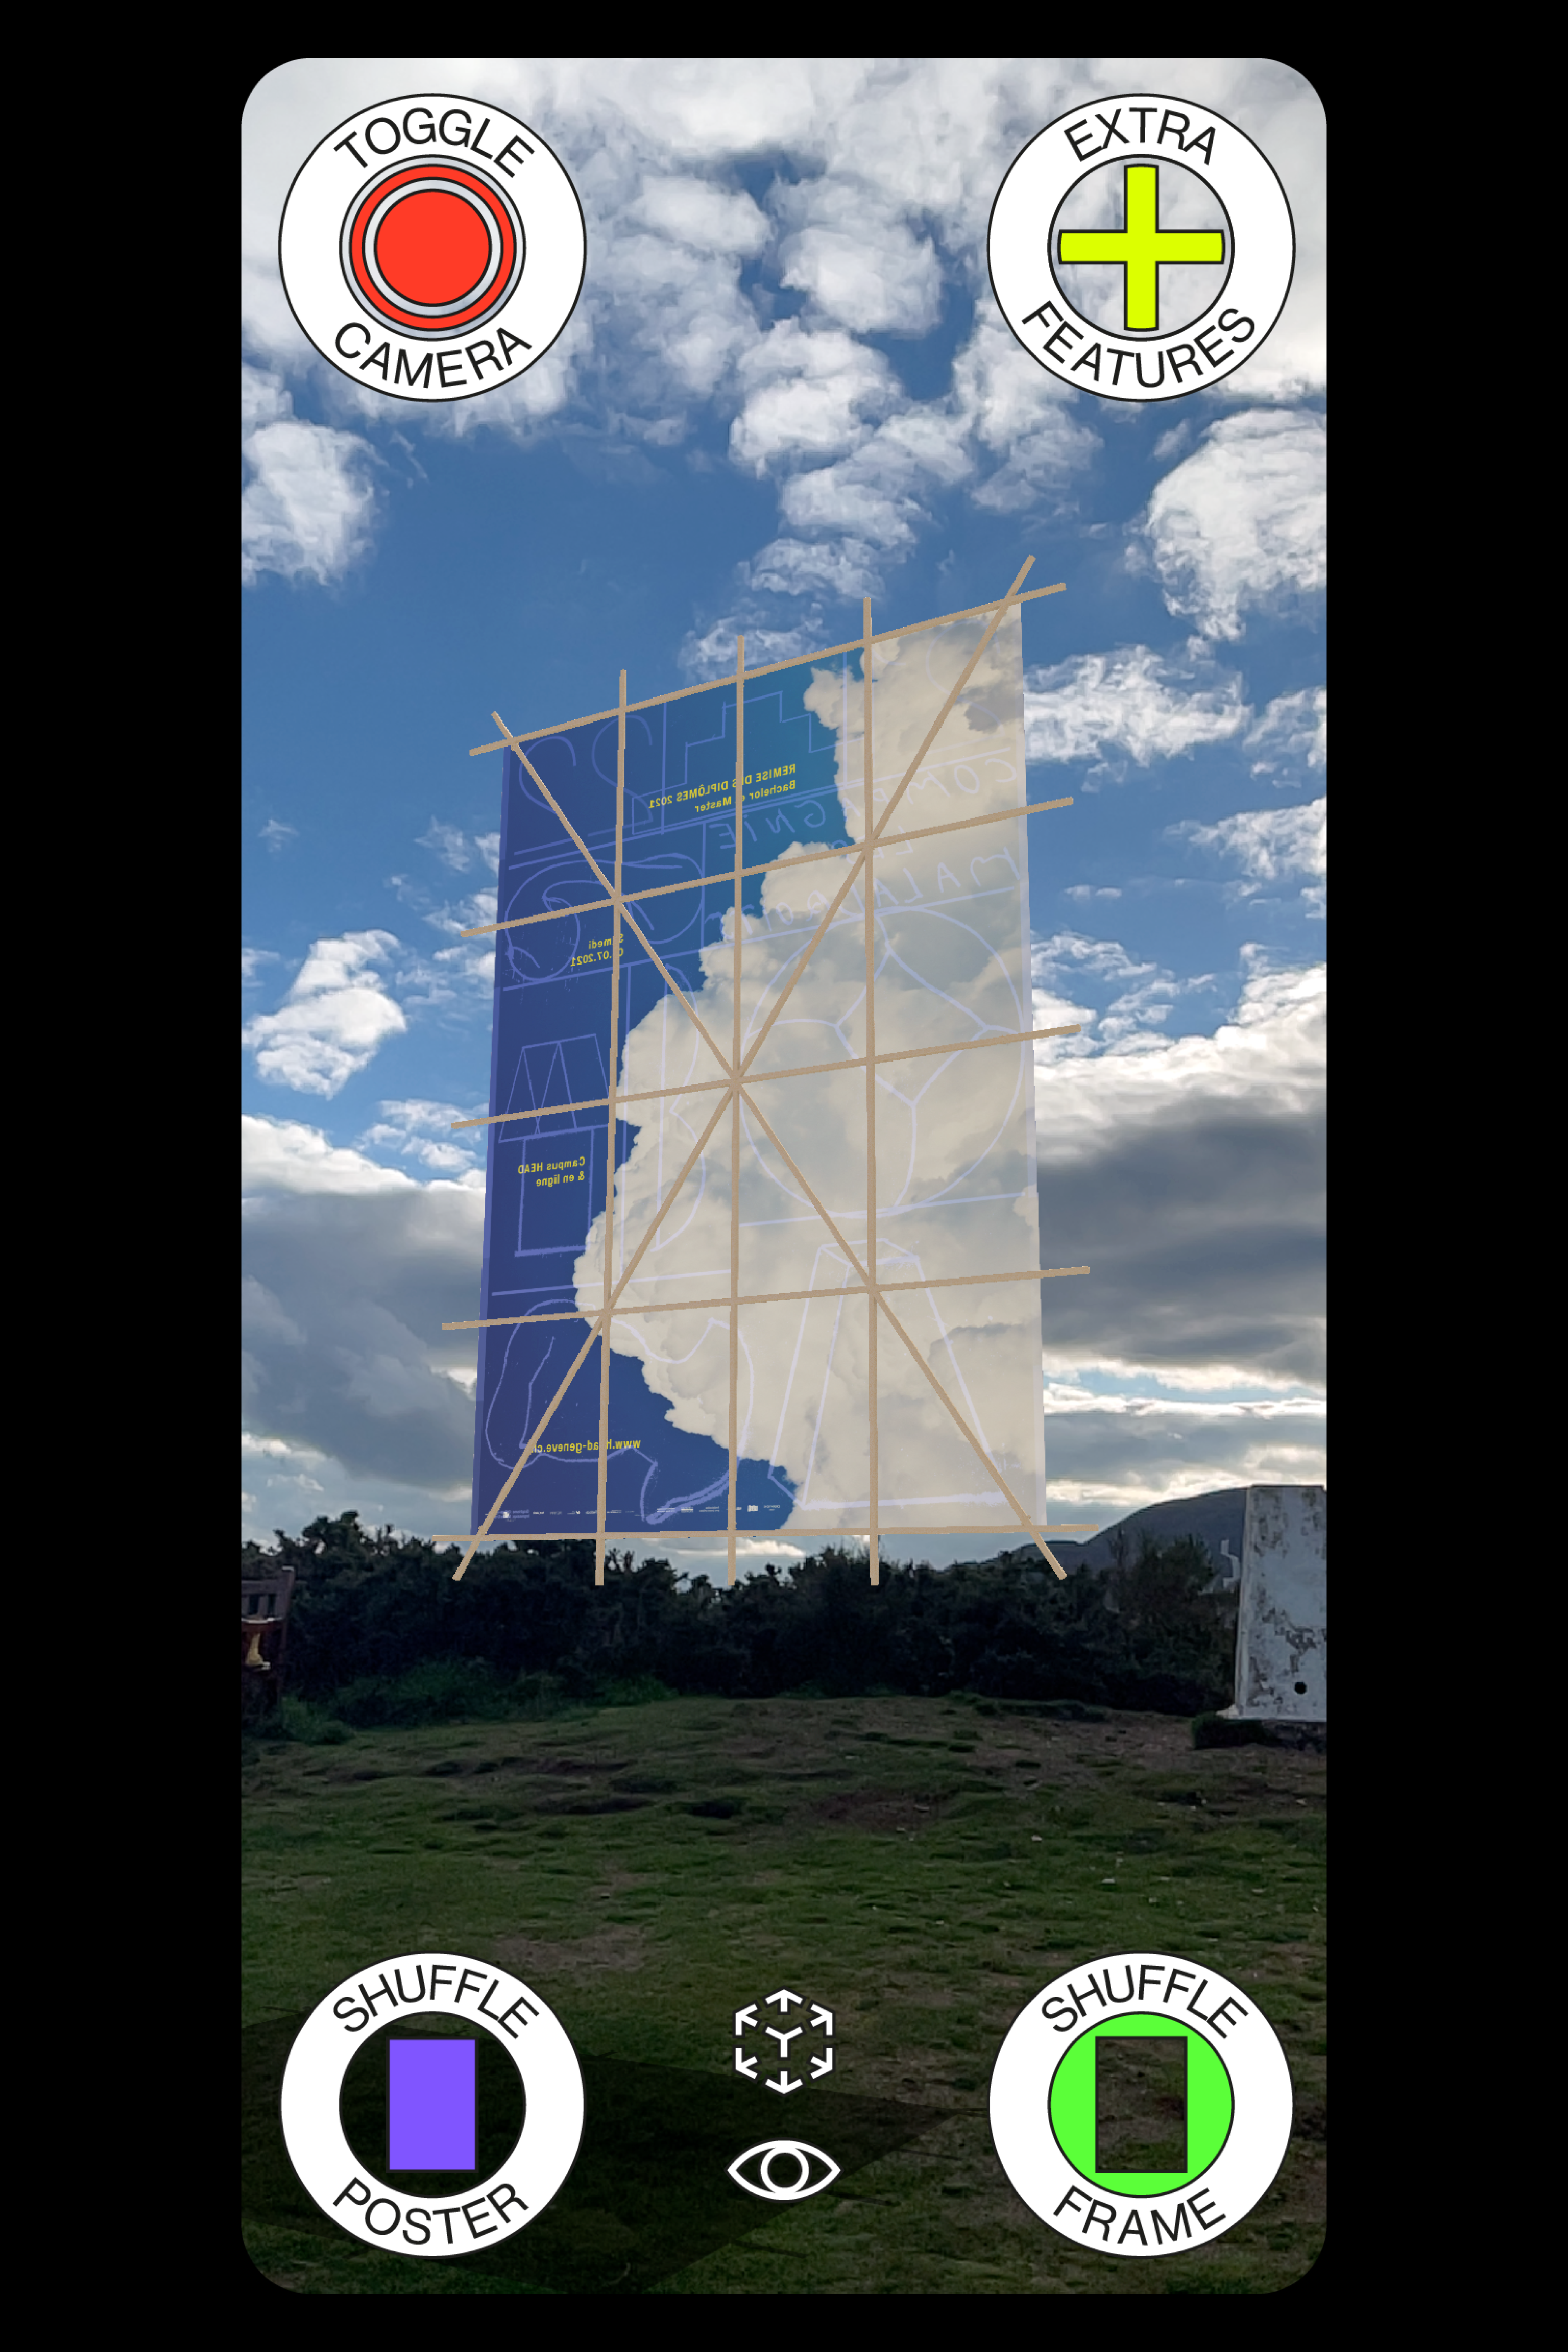 Screenshot of the app "Poster World" showing a kite shaped billboard displayed in augmented reality.